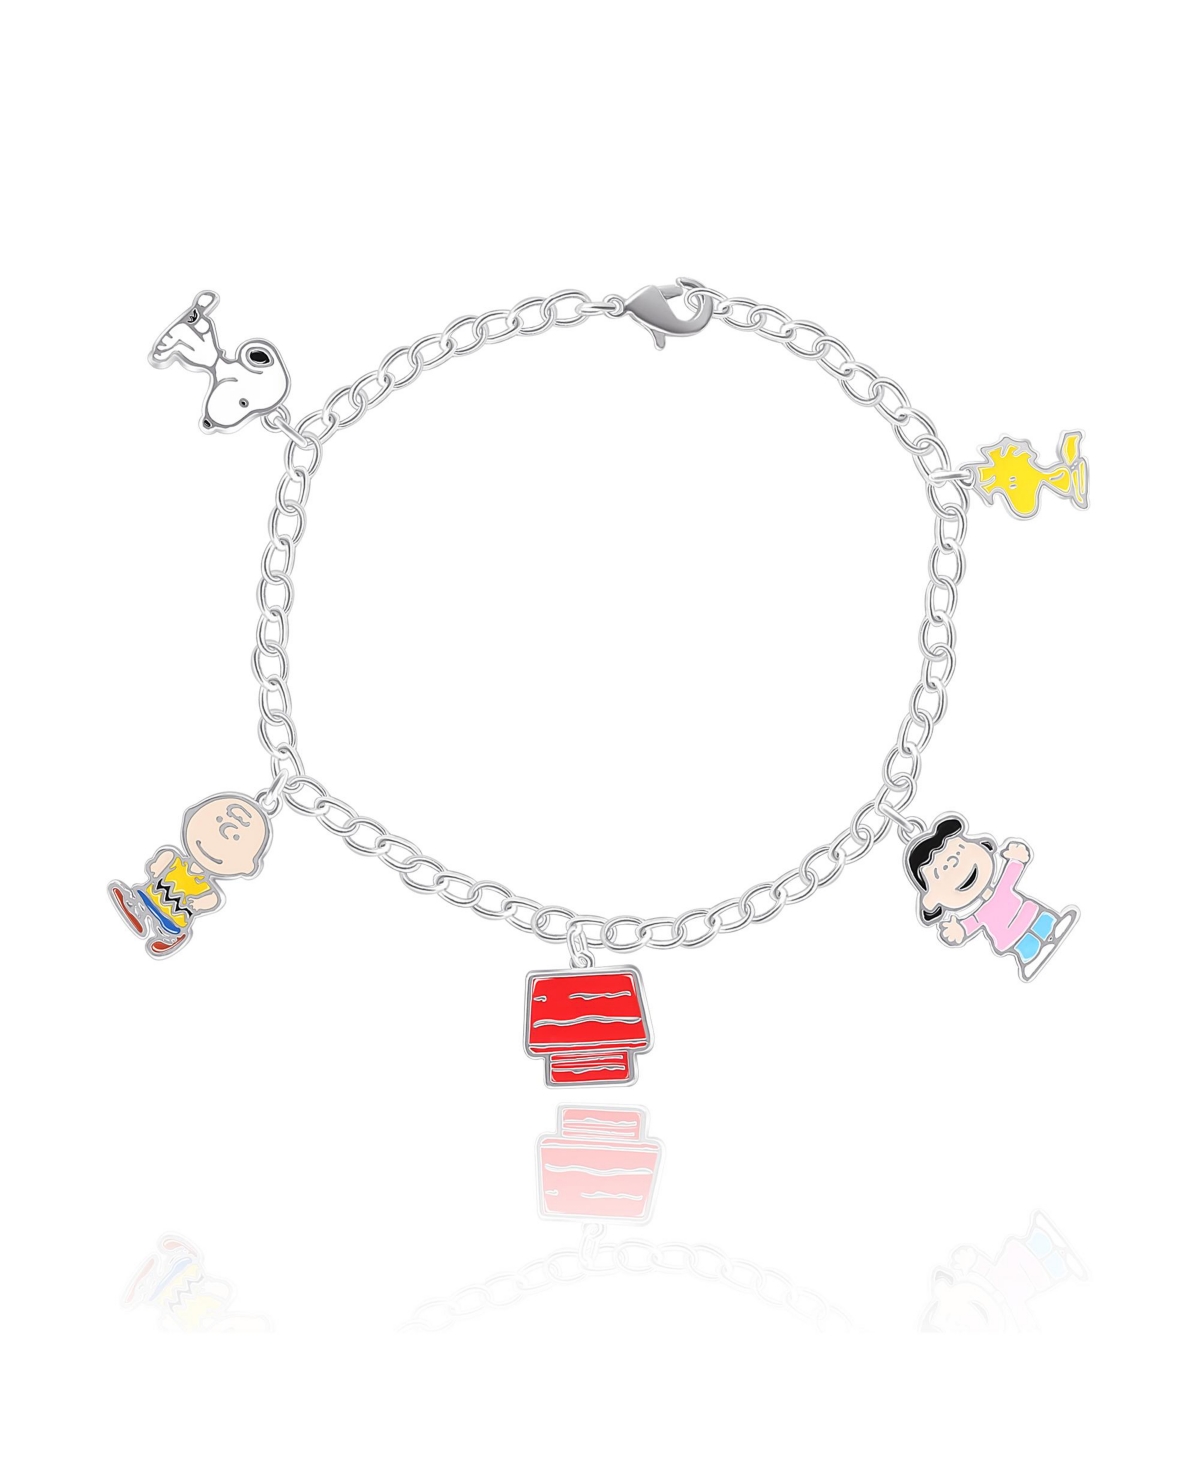 Snoopy and Friends Silver Flash Plated Charm Gift Bracelet, 7.5" - Gold tone